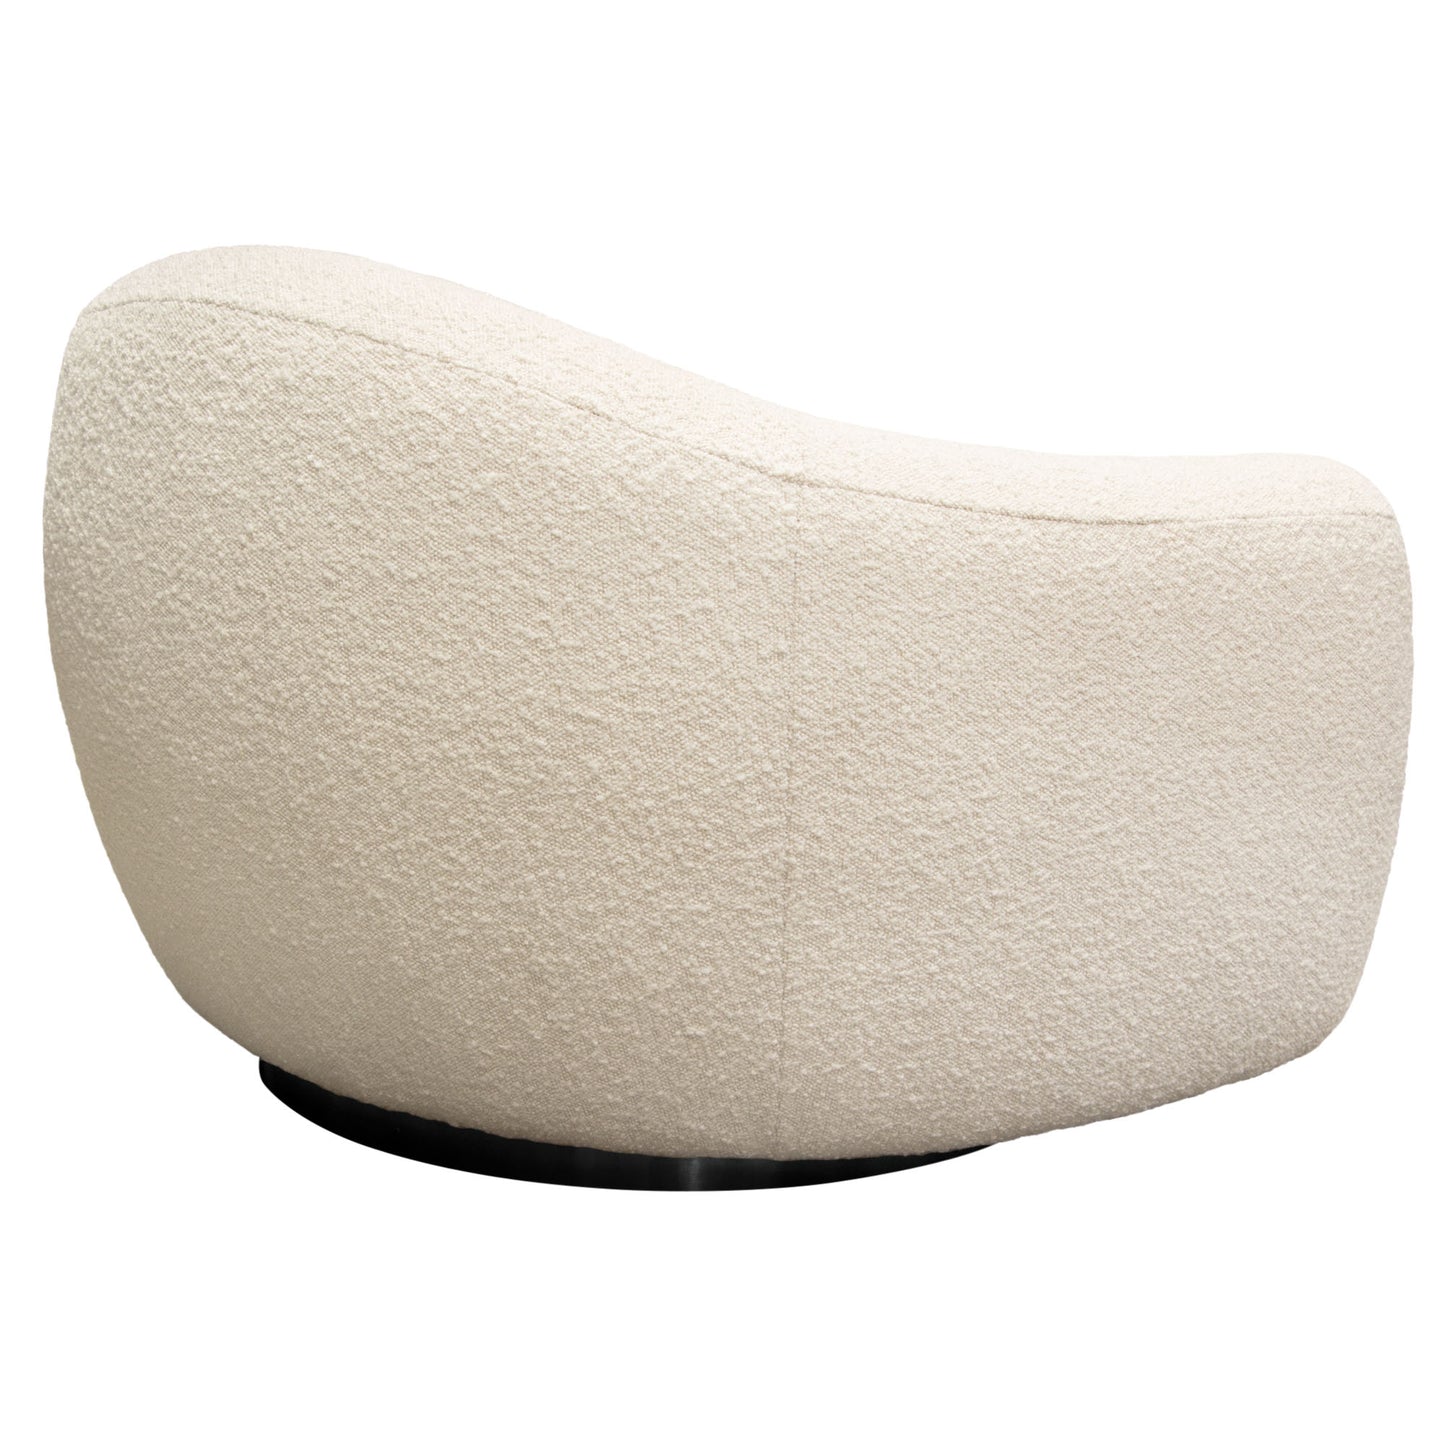 Pascal Swivel Chair in Bone Boucle Textured Fabric w/ Contoured Arms & Back